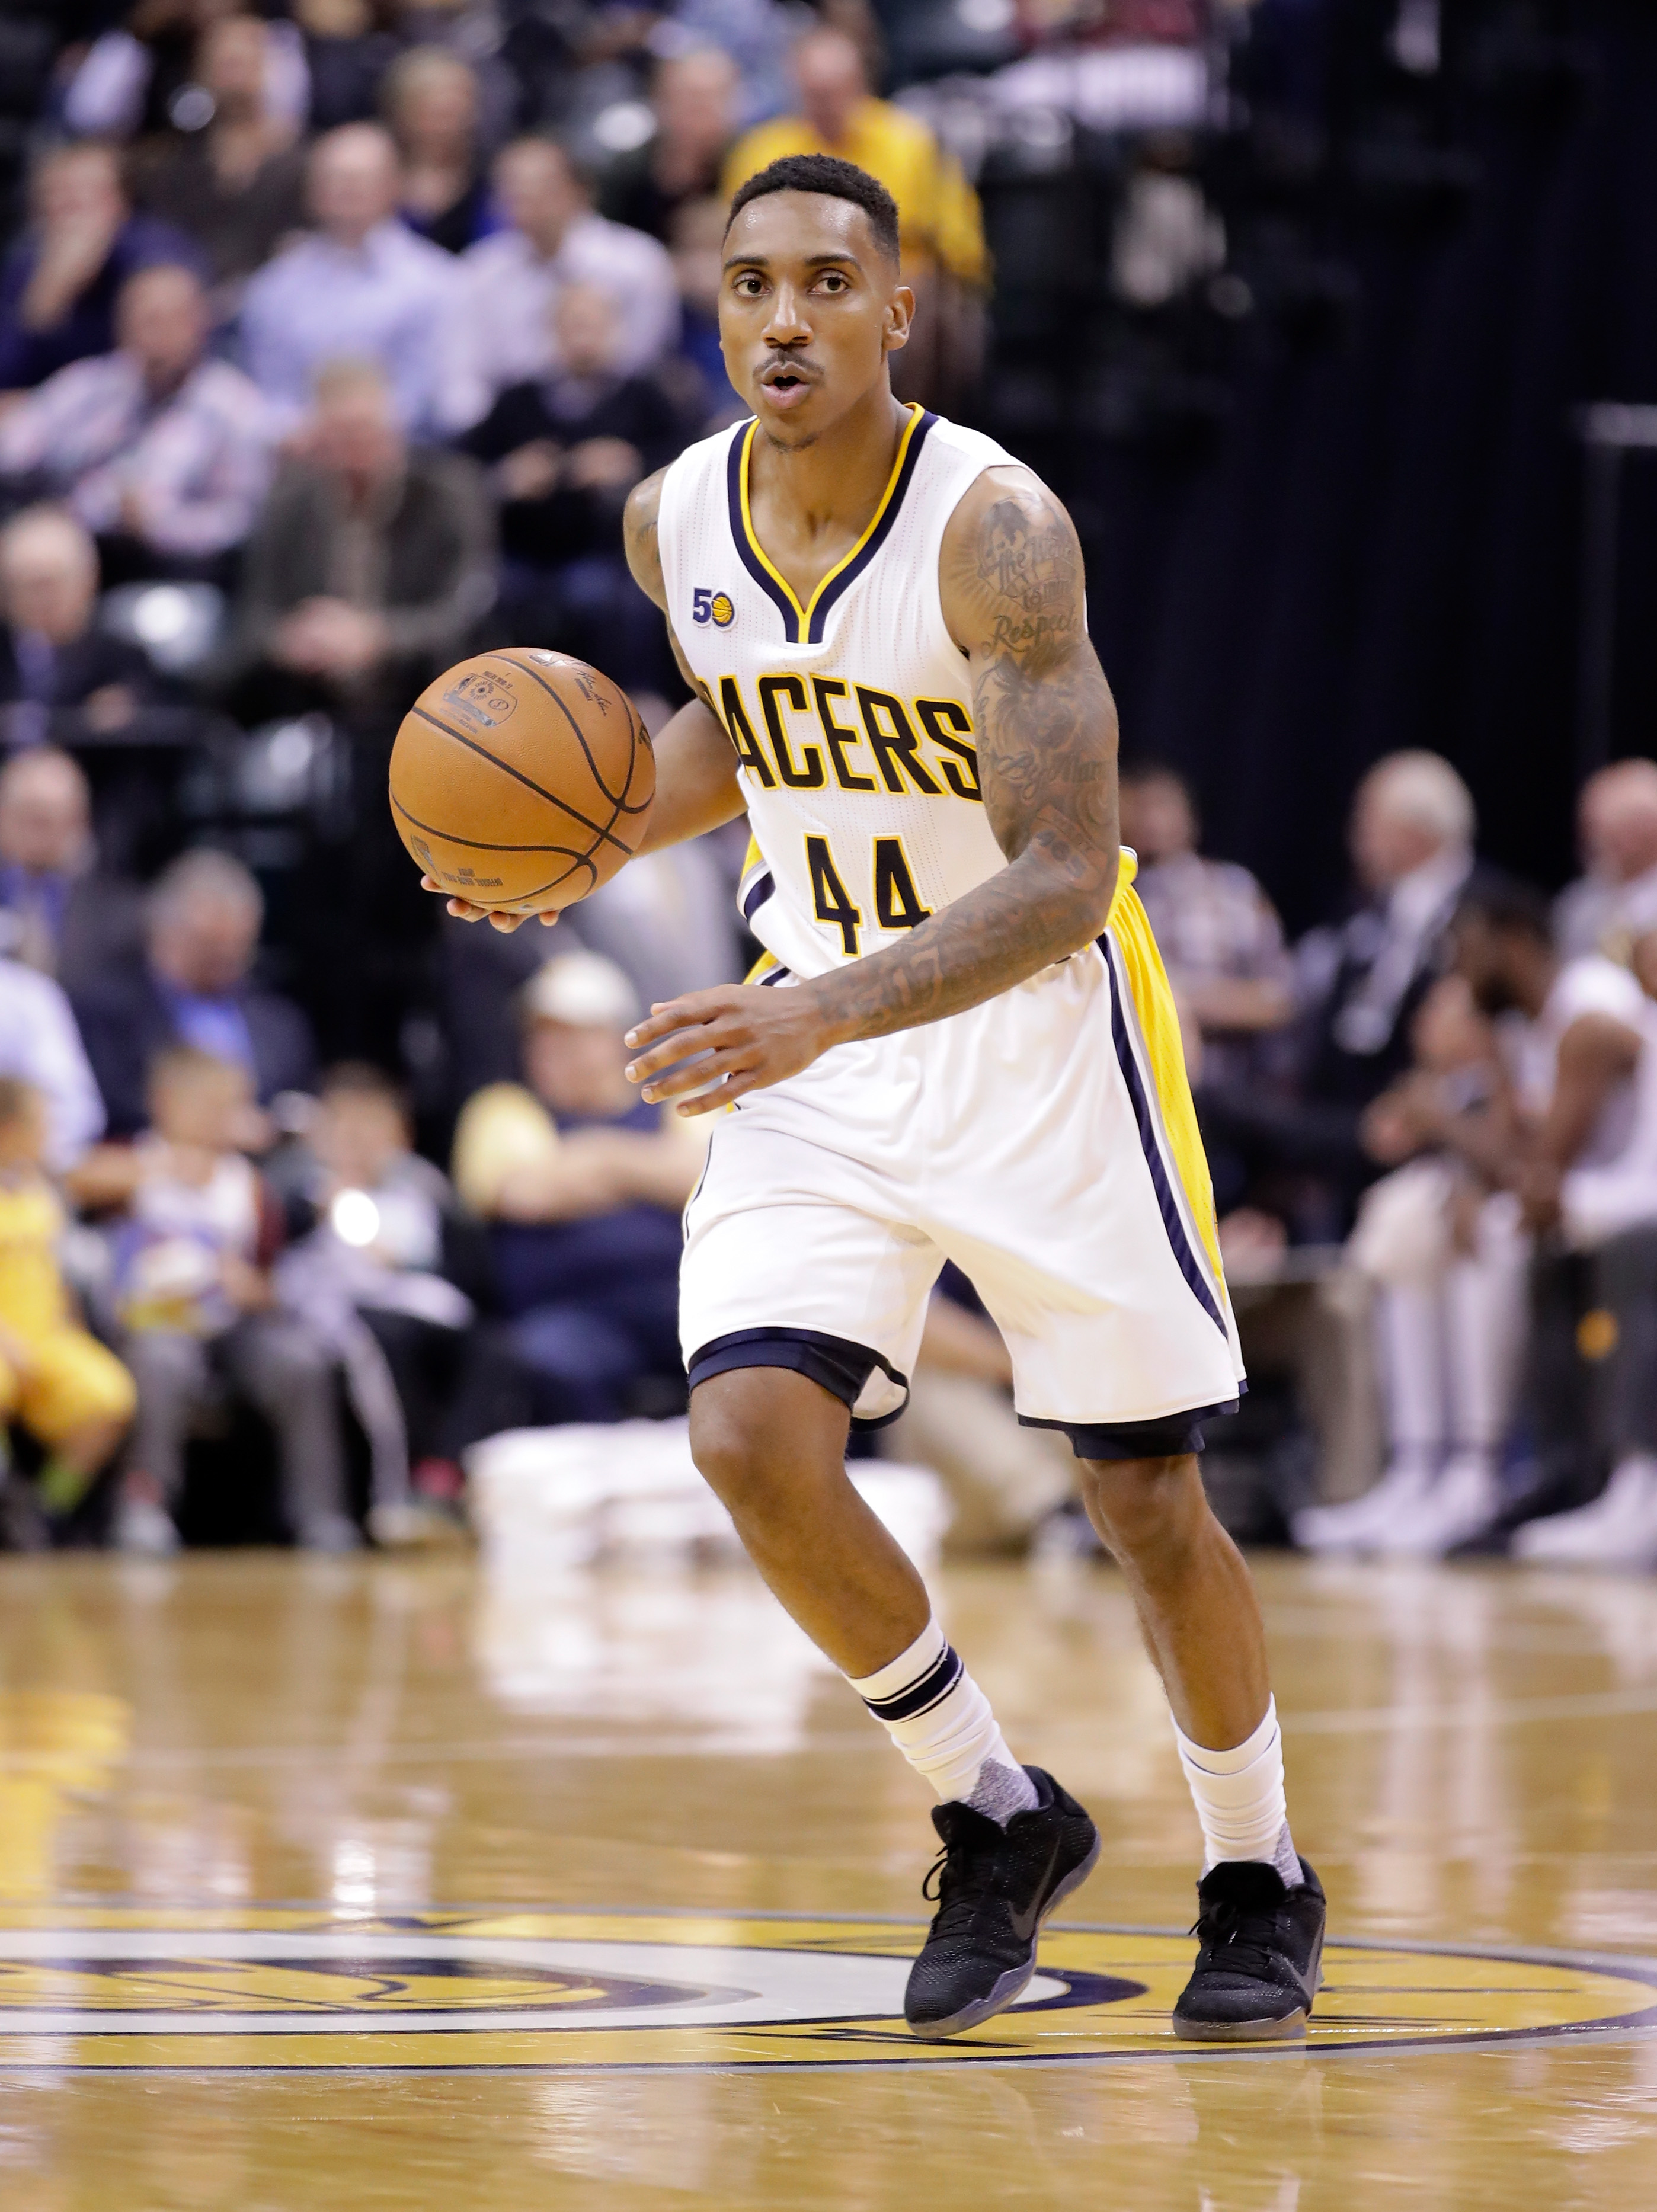 INDIANAPOLIS, IN - NOVEMBER 16: Jeff Teague #44 of the Indiana Pacers dribbles the ball during the game against the Cleveland Cavaliers at Bankers Life Fieldhouse on November 16, 2016 in Indianapolis, Indiana. NOTE TO USER: User expressly acknowledges and agrees that, by downloading and or using this photograph, User is consenting to the terms and conditions of the Getty Images License Agreement   Andy Lyons/Getty Images/AFP